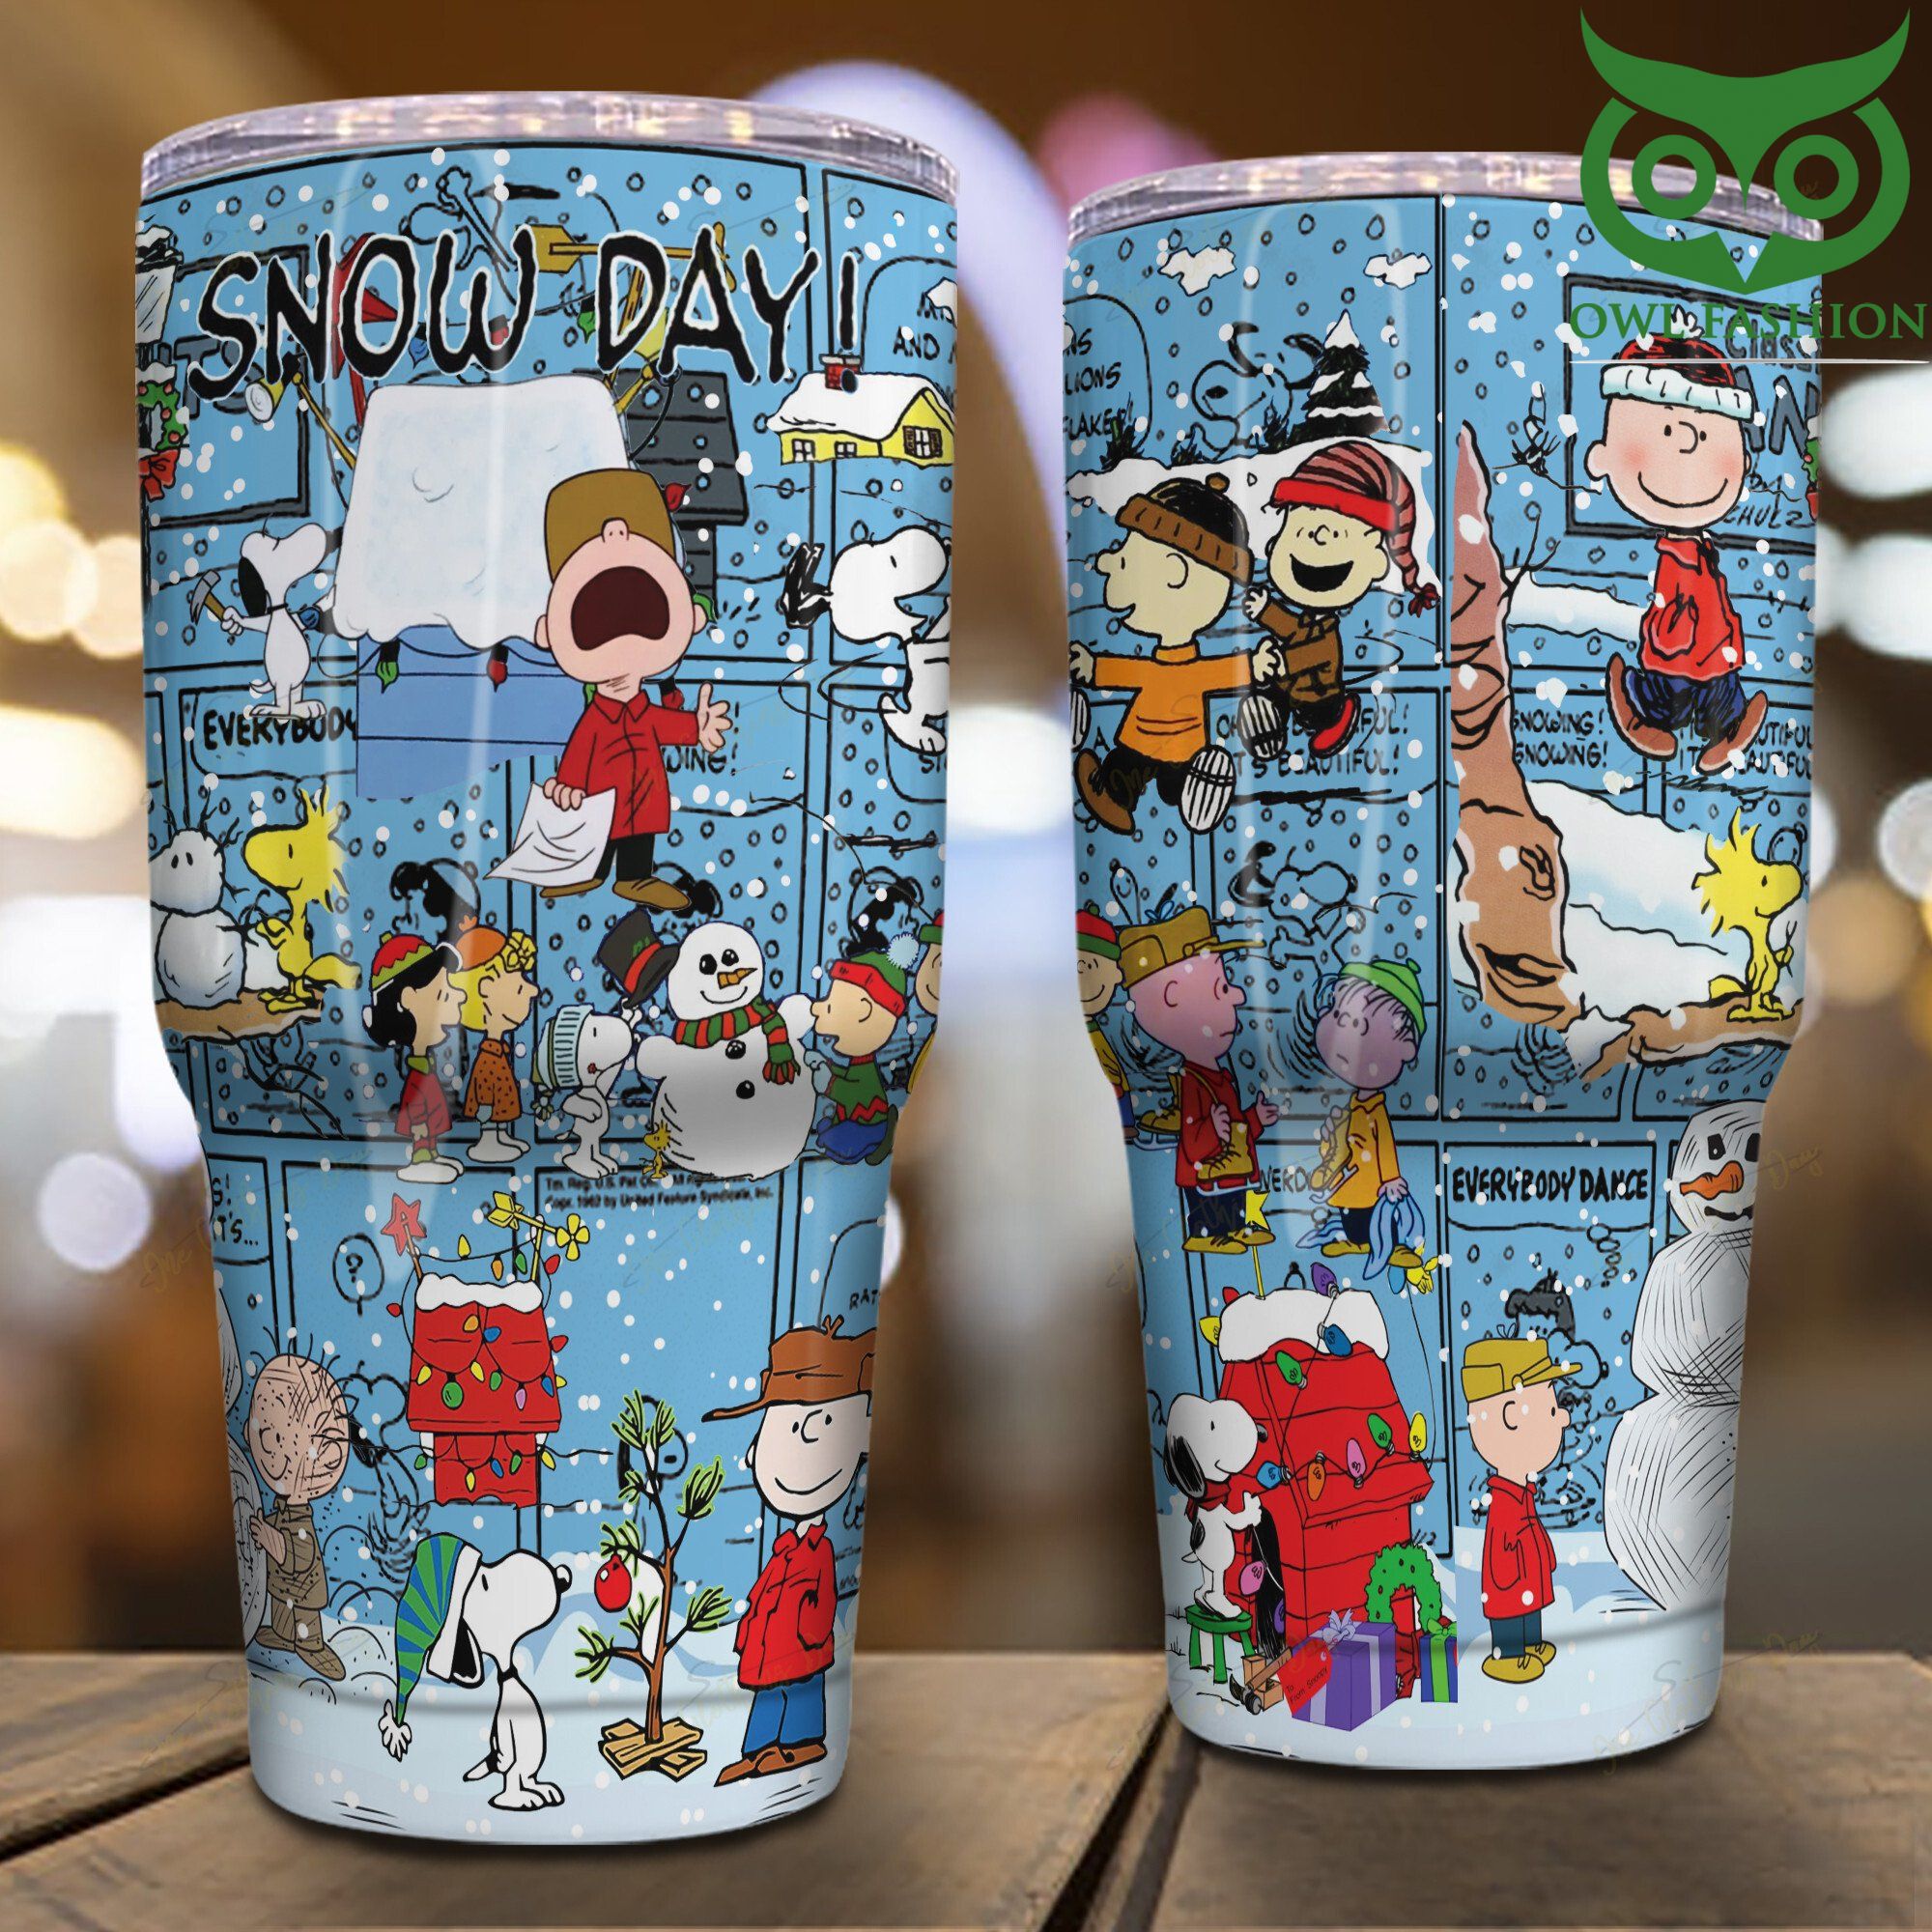 7 Snooby Snow Day Friends Tumbler